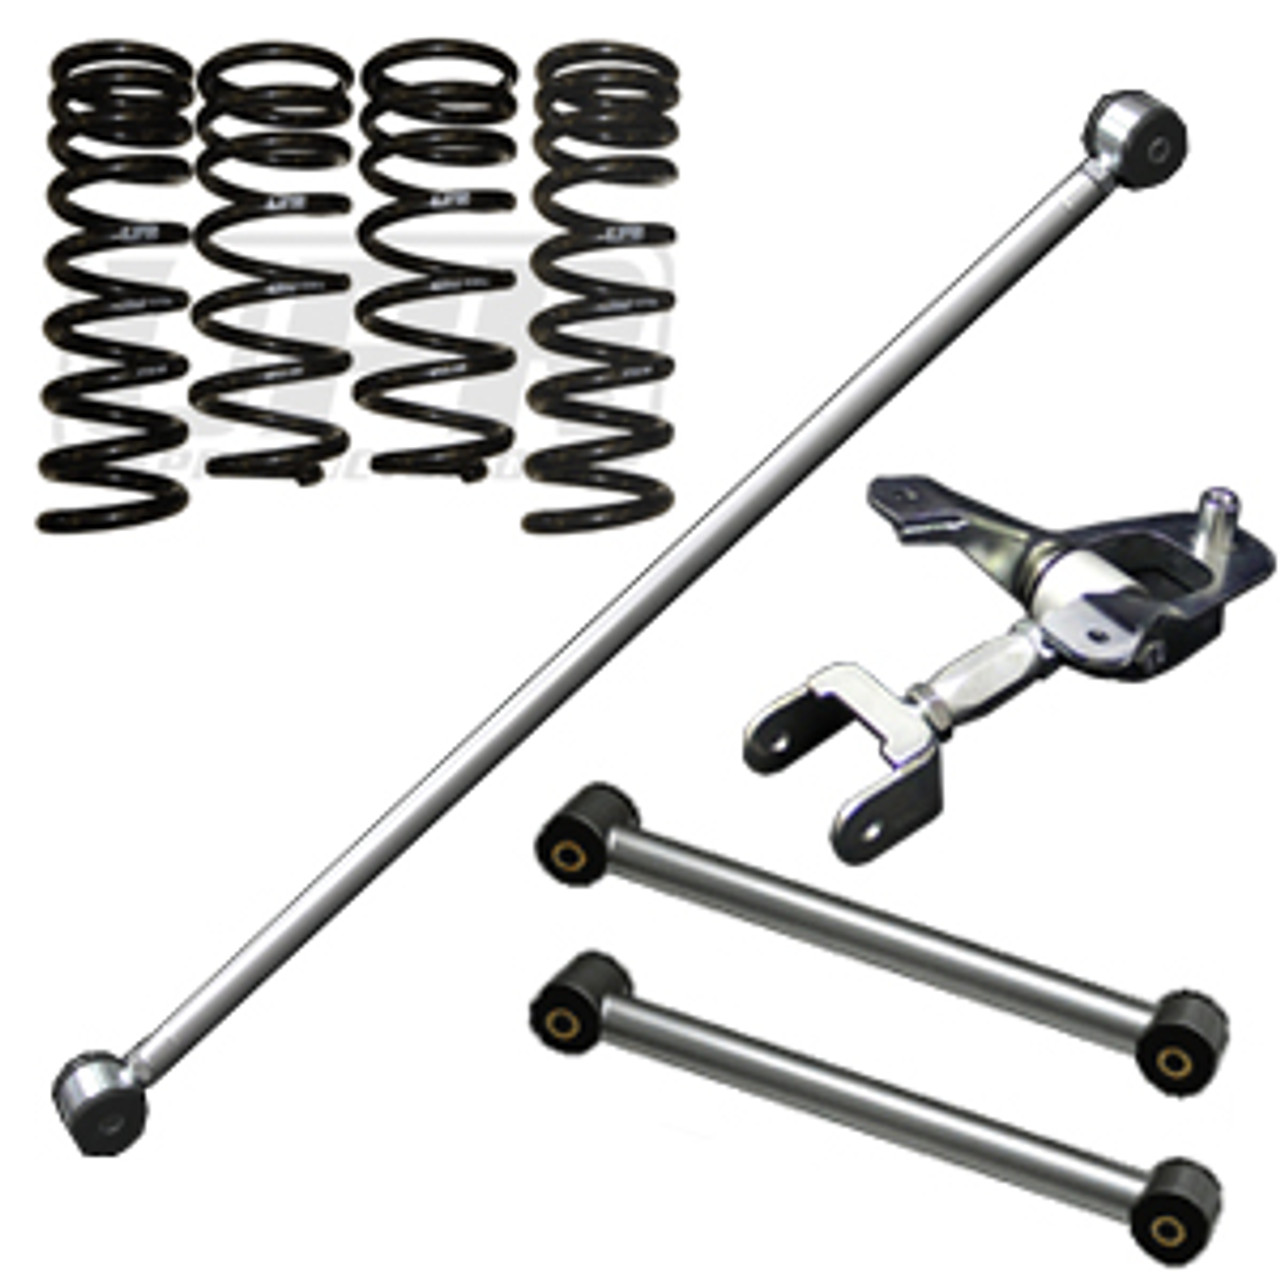 11-14 Mustang 5.0L Pro Street Rear Suspension Package IV